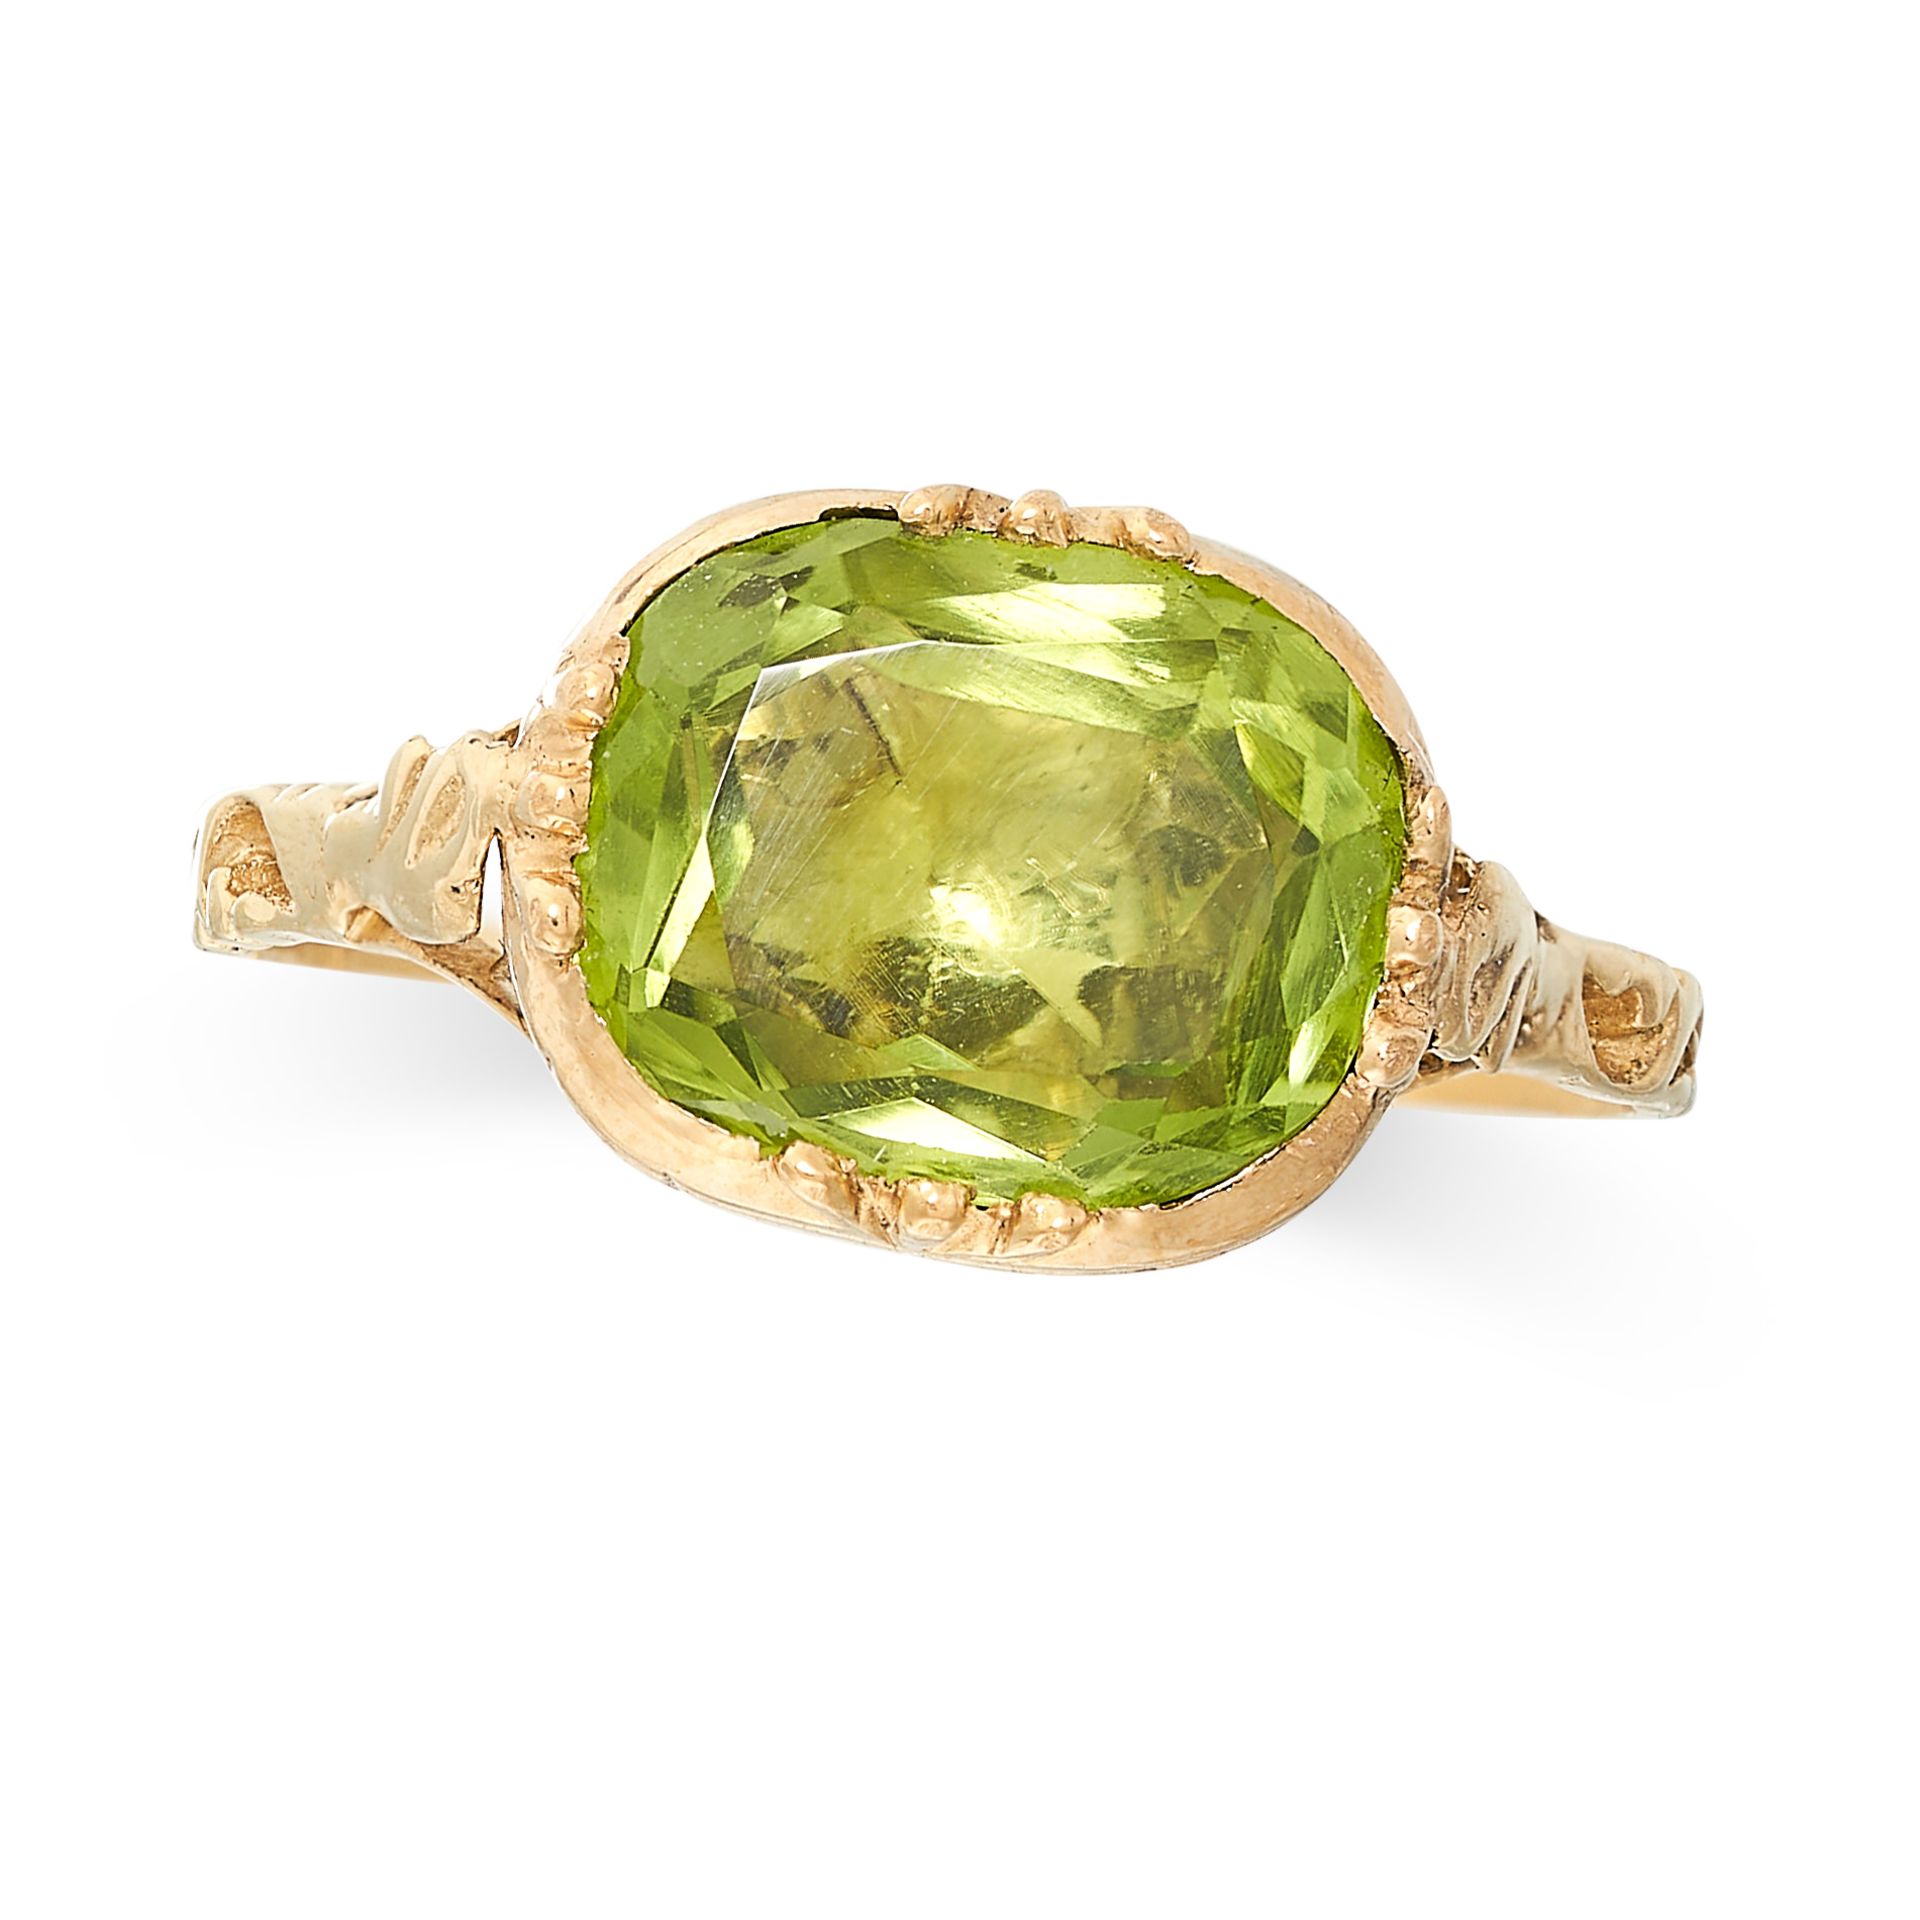 A PERIDOT DRESS RING, 19TH CENTURY AND LATER in yellow gold, later converted to a ring with the